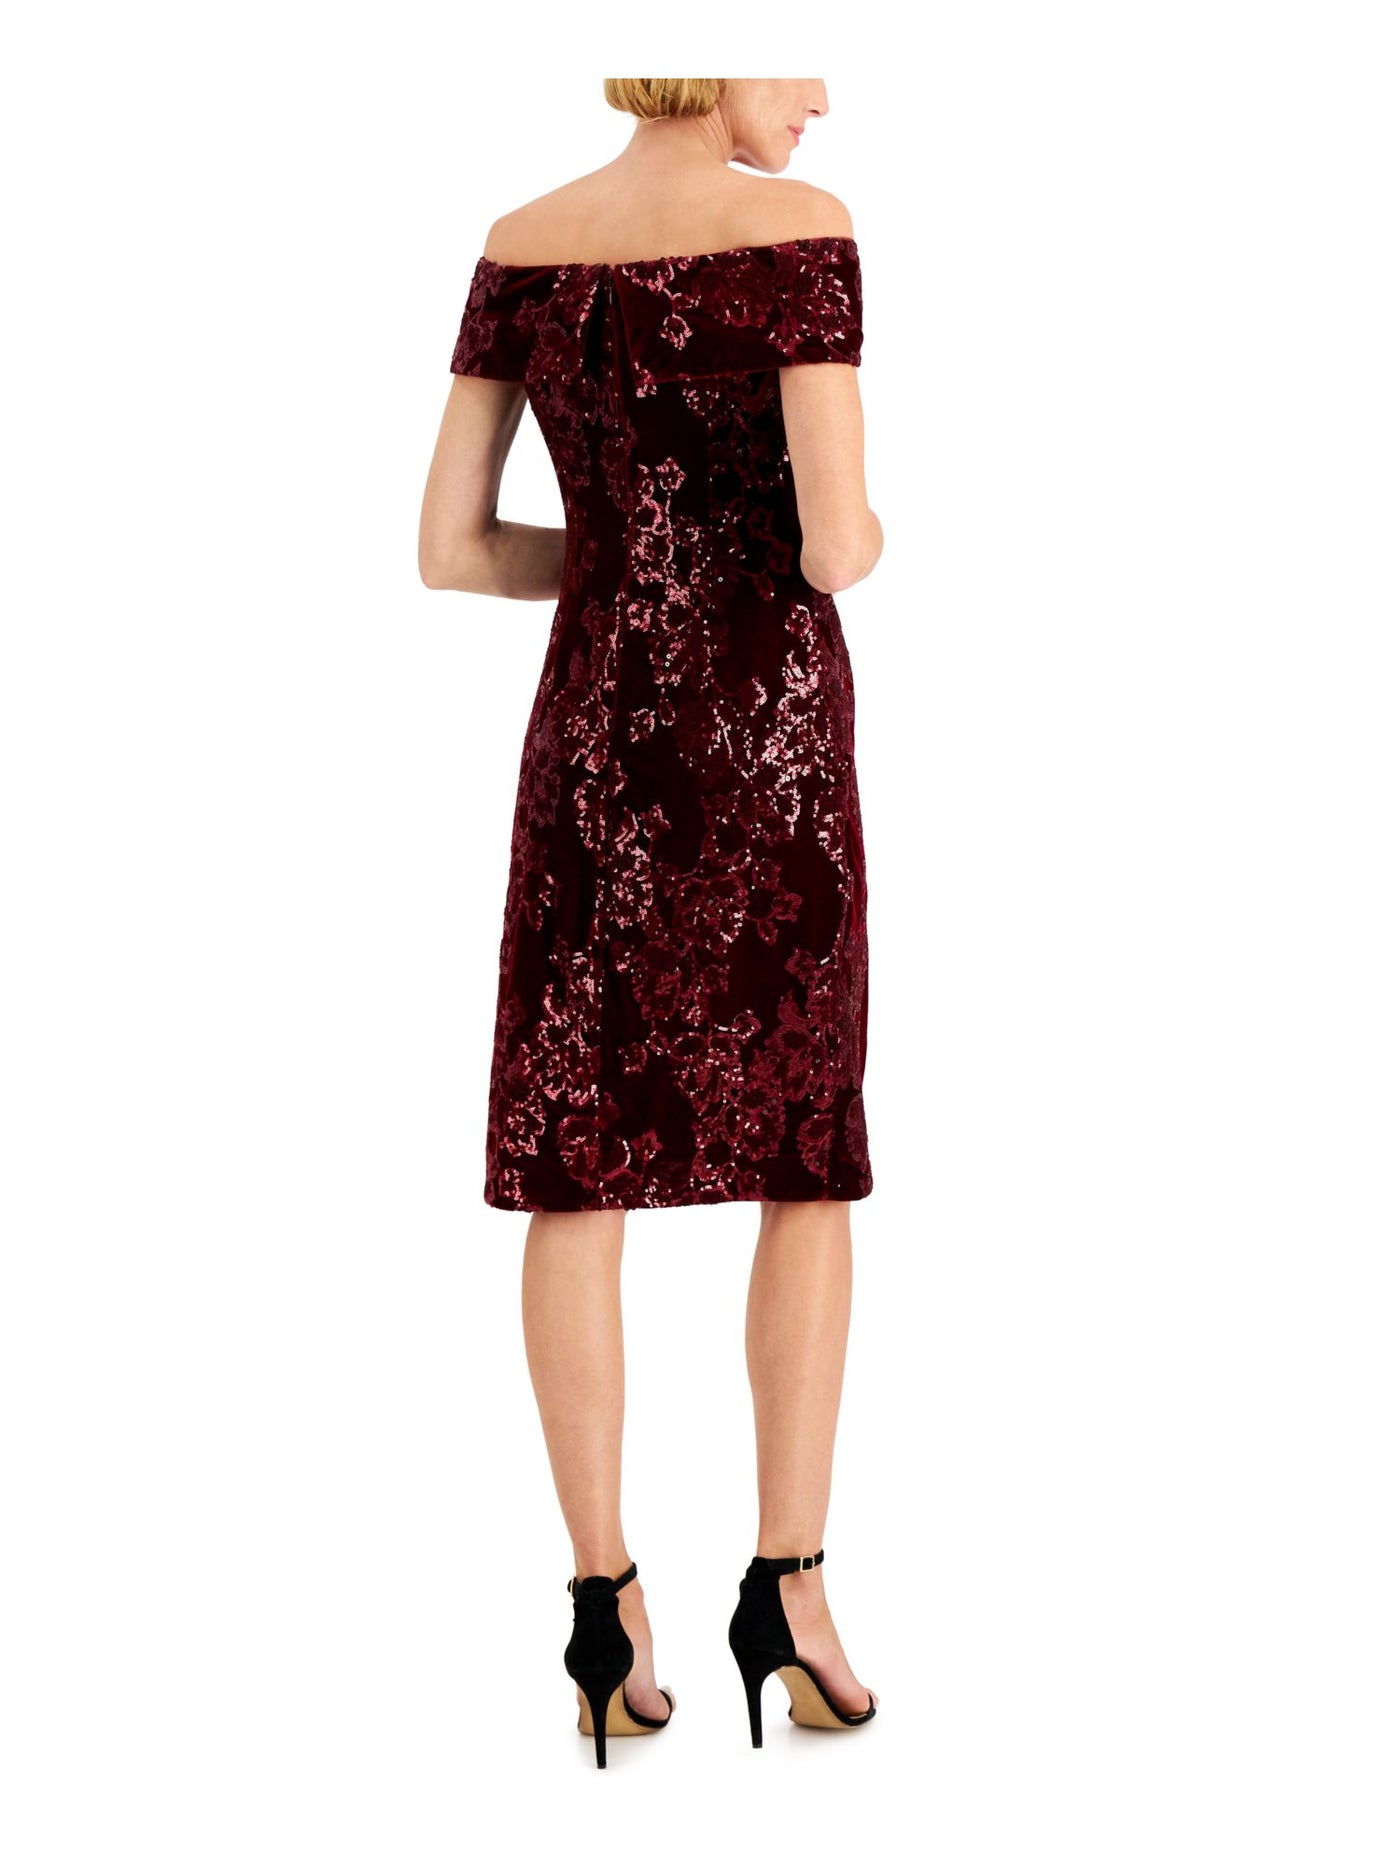 ADRIANNA PAPELL Womens Maroon Stretch Embellished Zippered Lined Short Sleeve Off Shoulder Knee Length Evening Sheath Dress 18